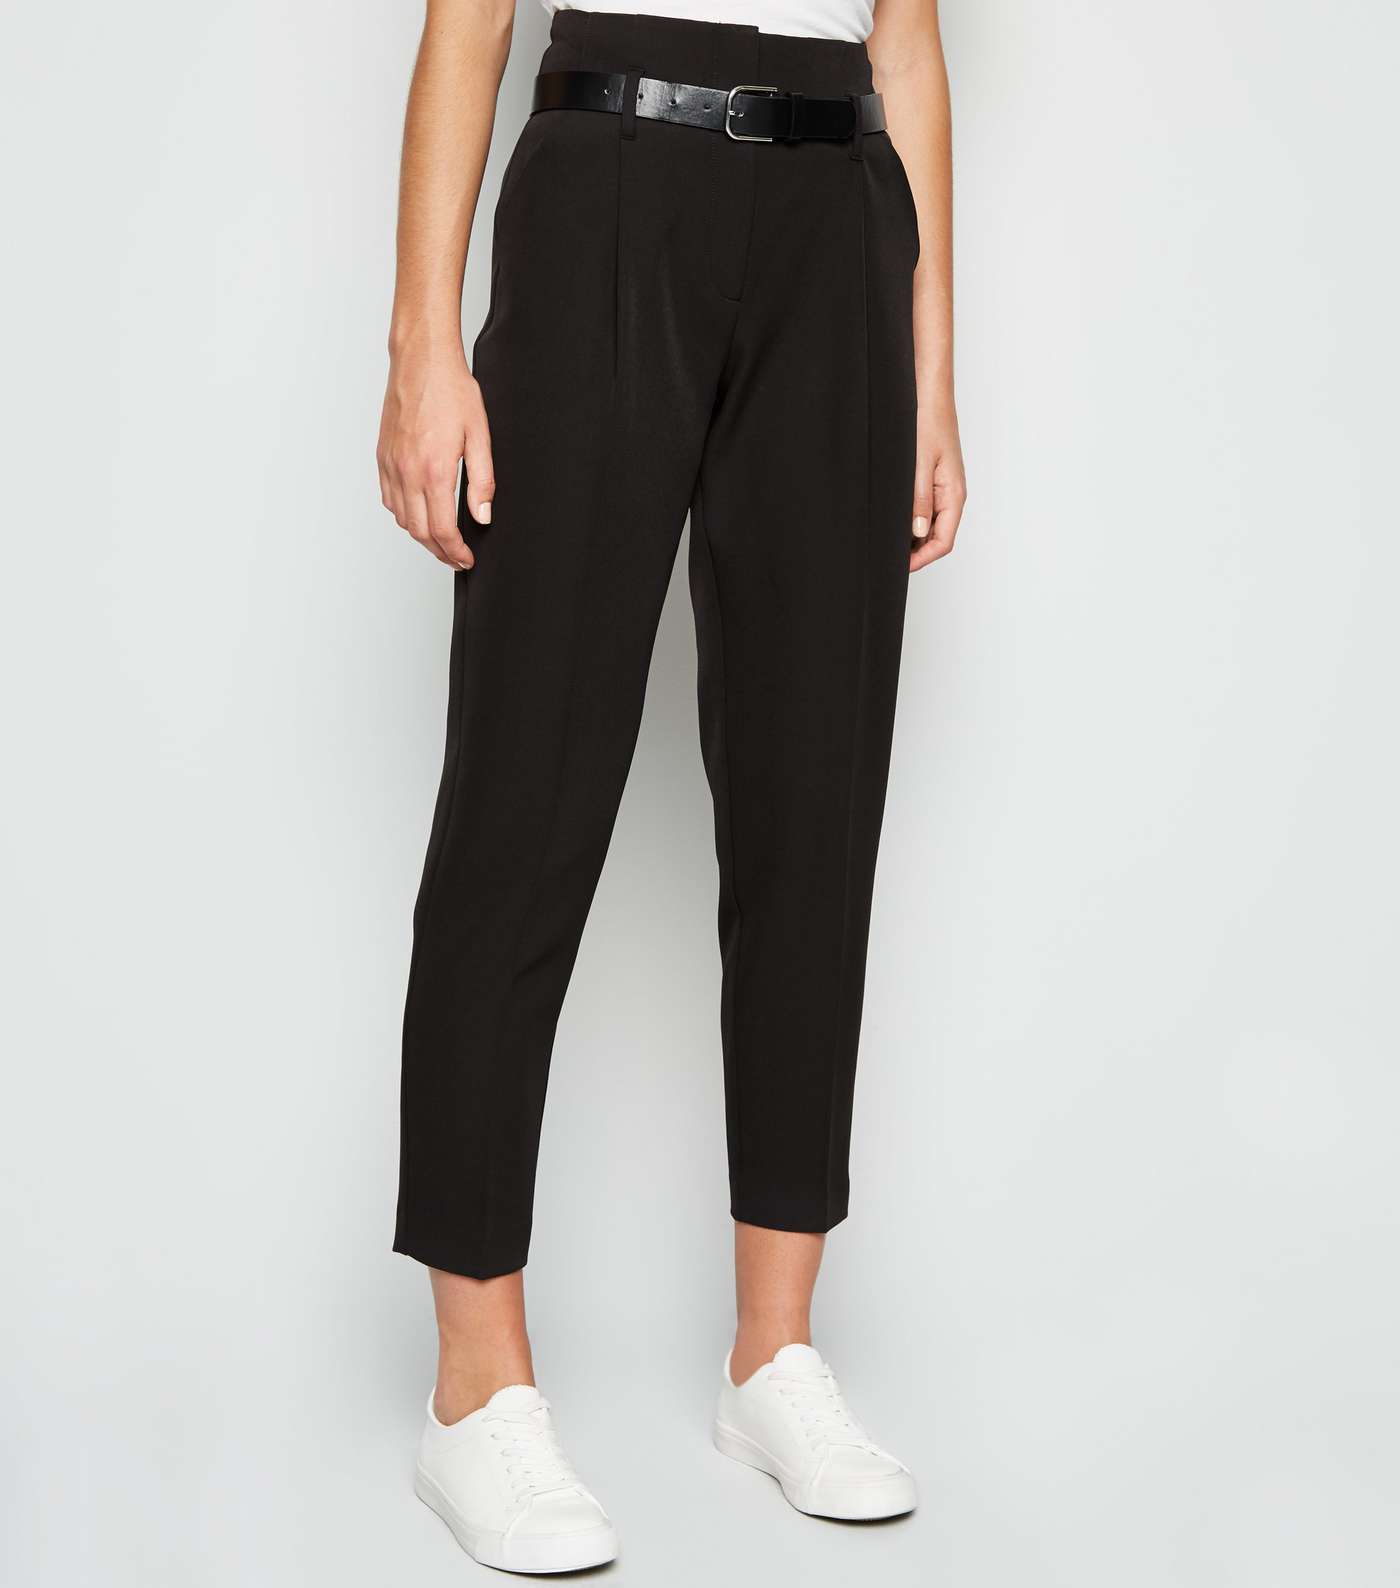 Black Belted High Waist Tapered Trousers Image 2